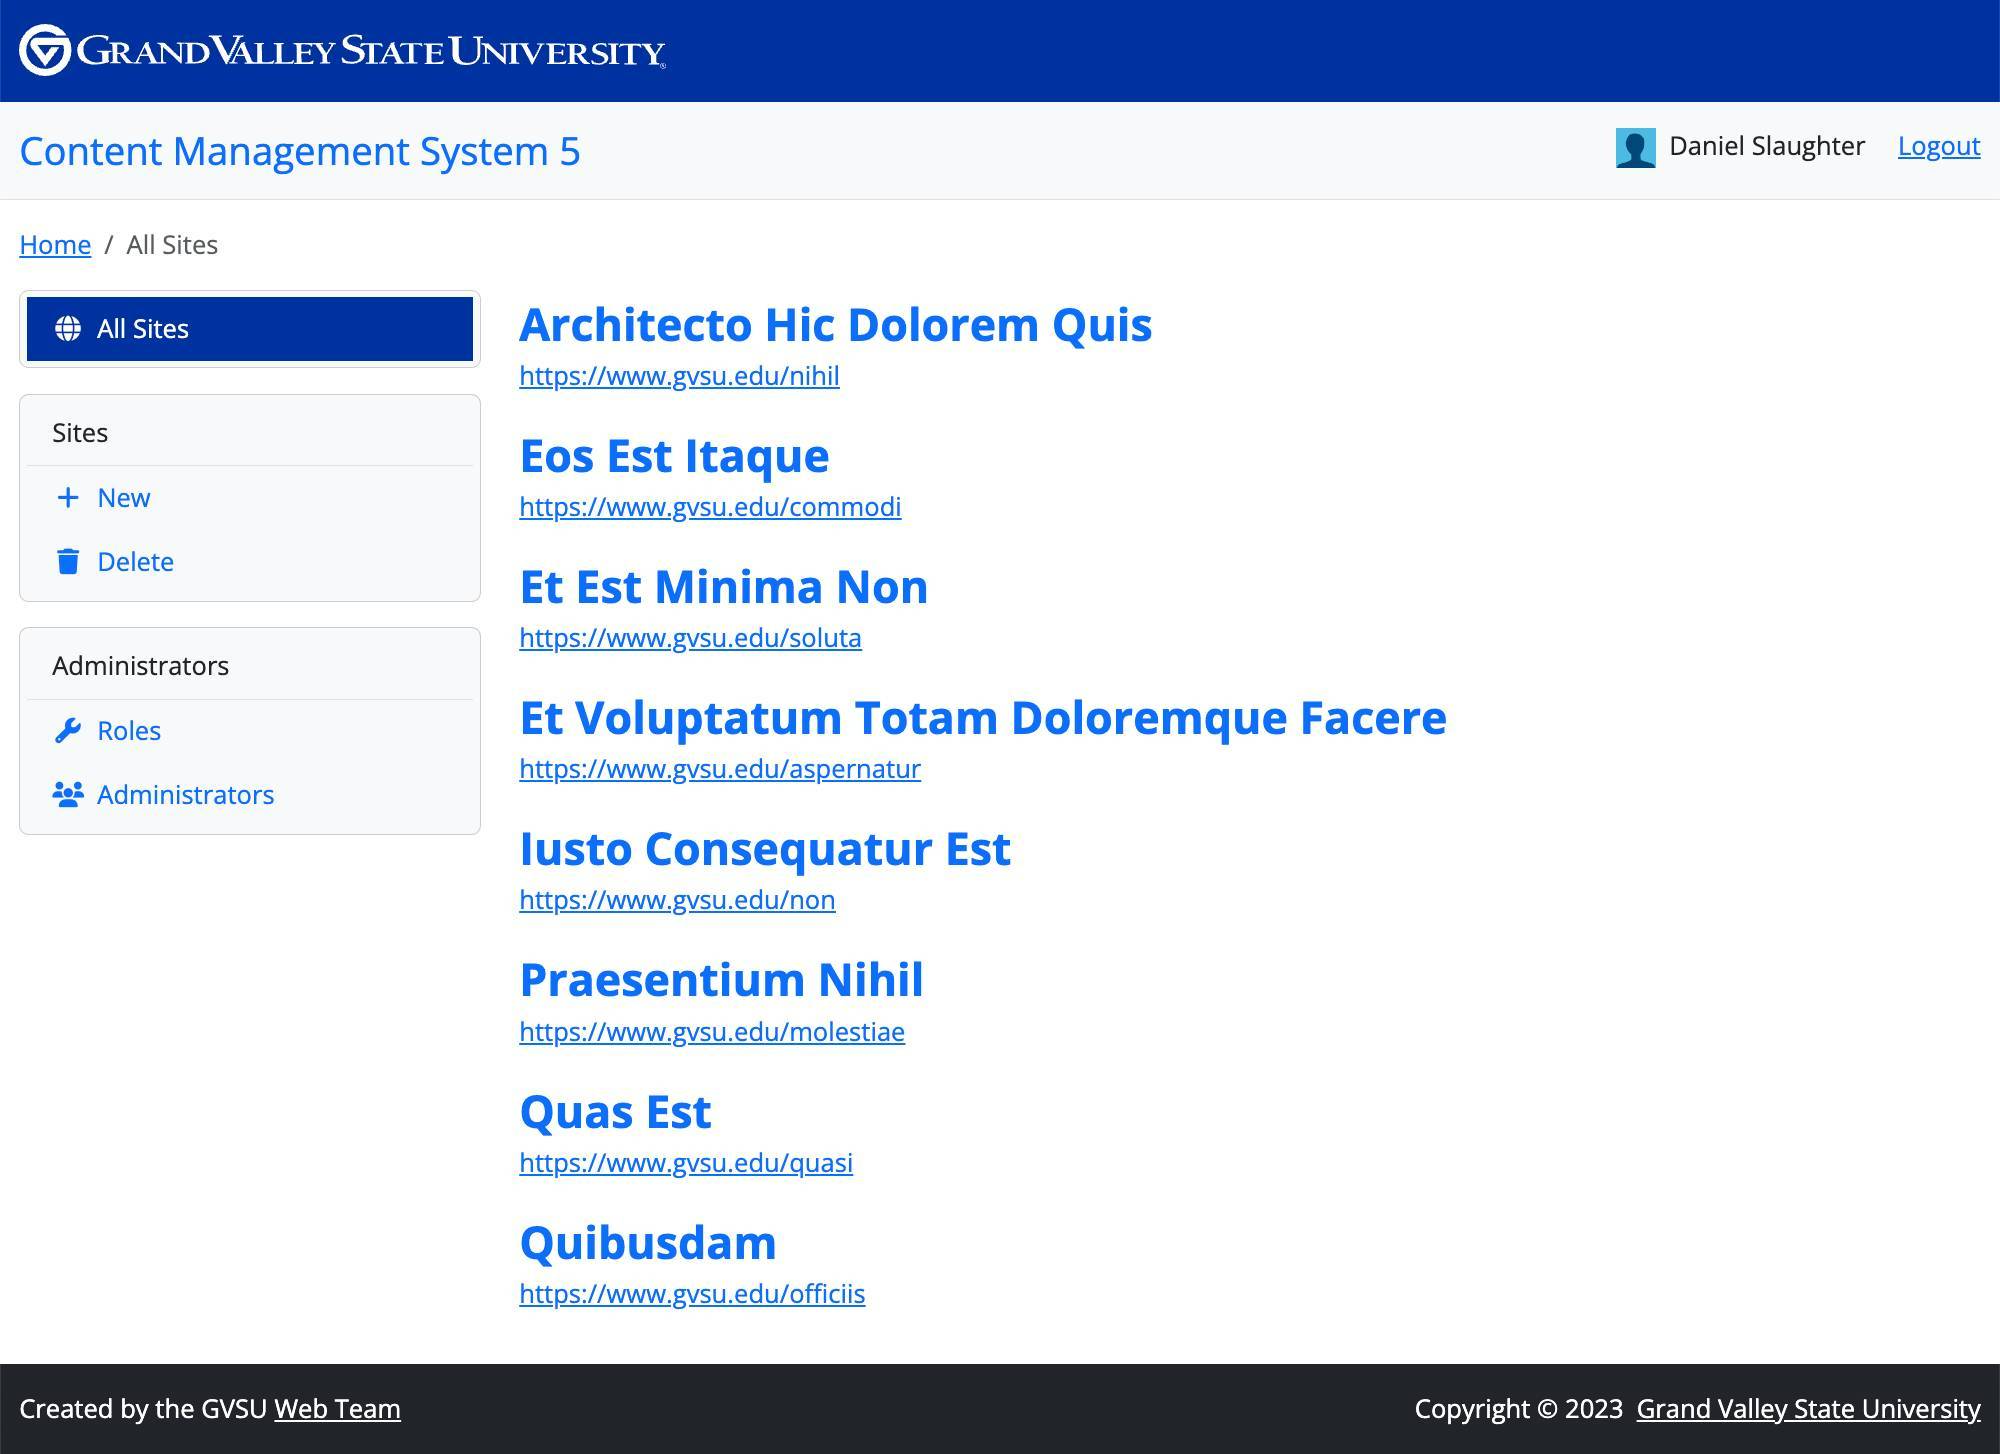 A screenshot of home screen in the CMS 5.